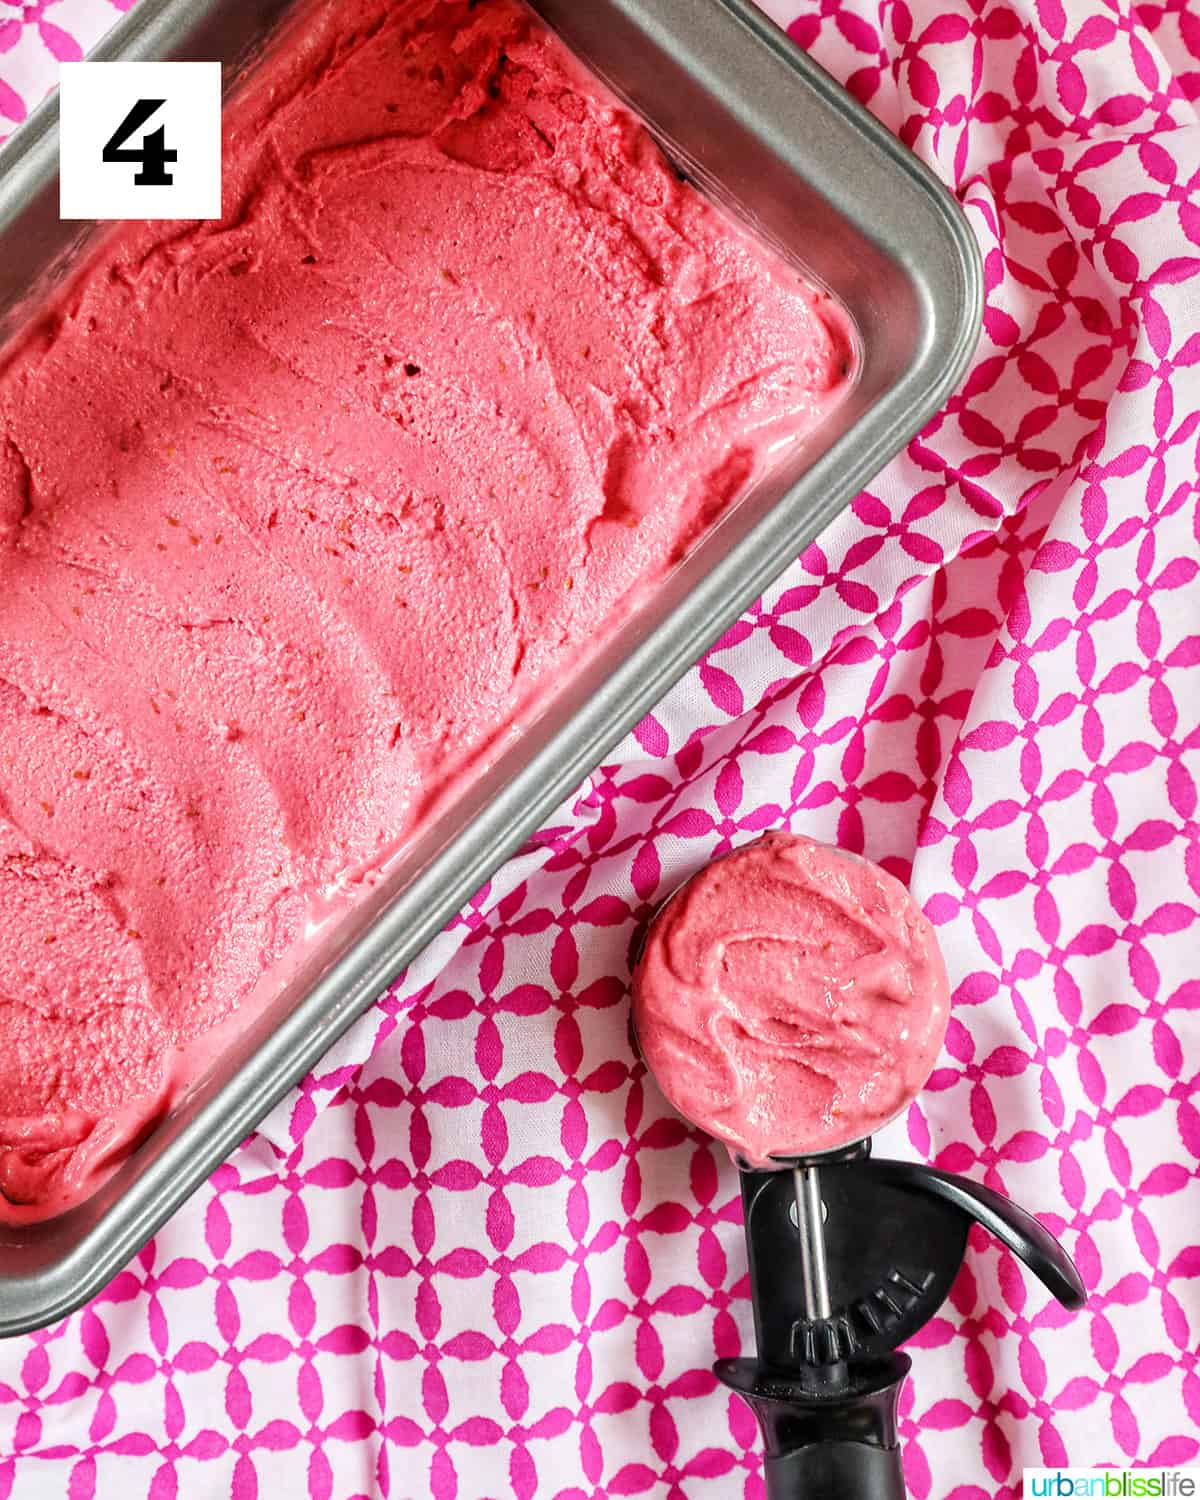 pan full of raspberry sherbet with side of ice cream scoop filled with raspberry sherbet on a pink and white napkin.